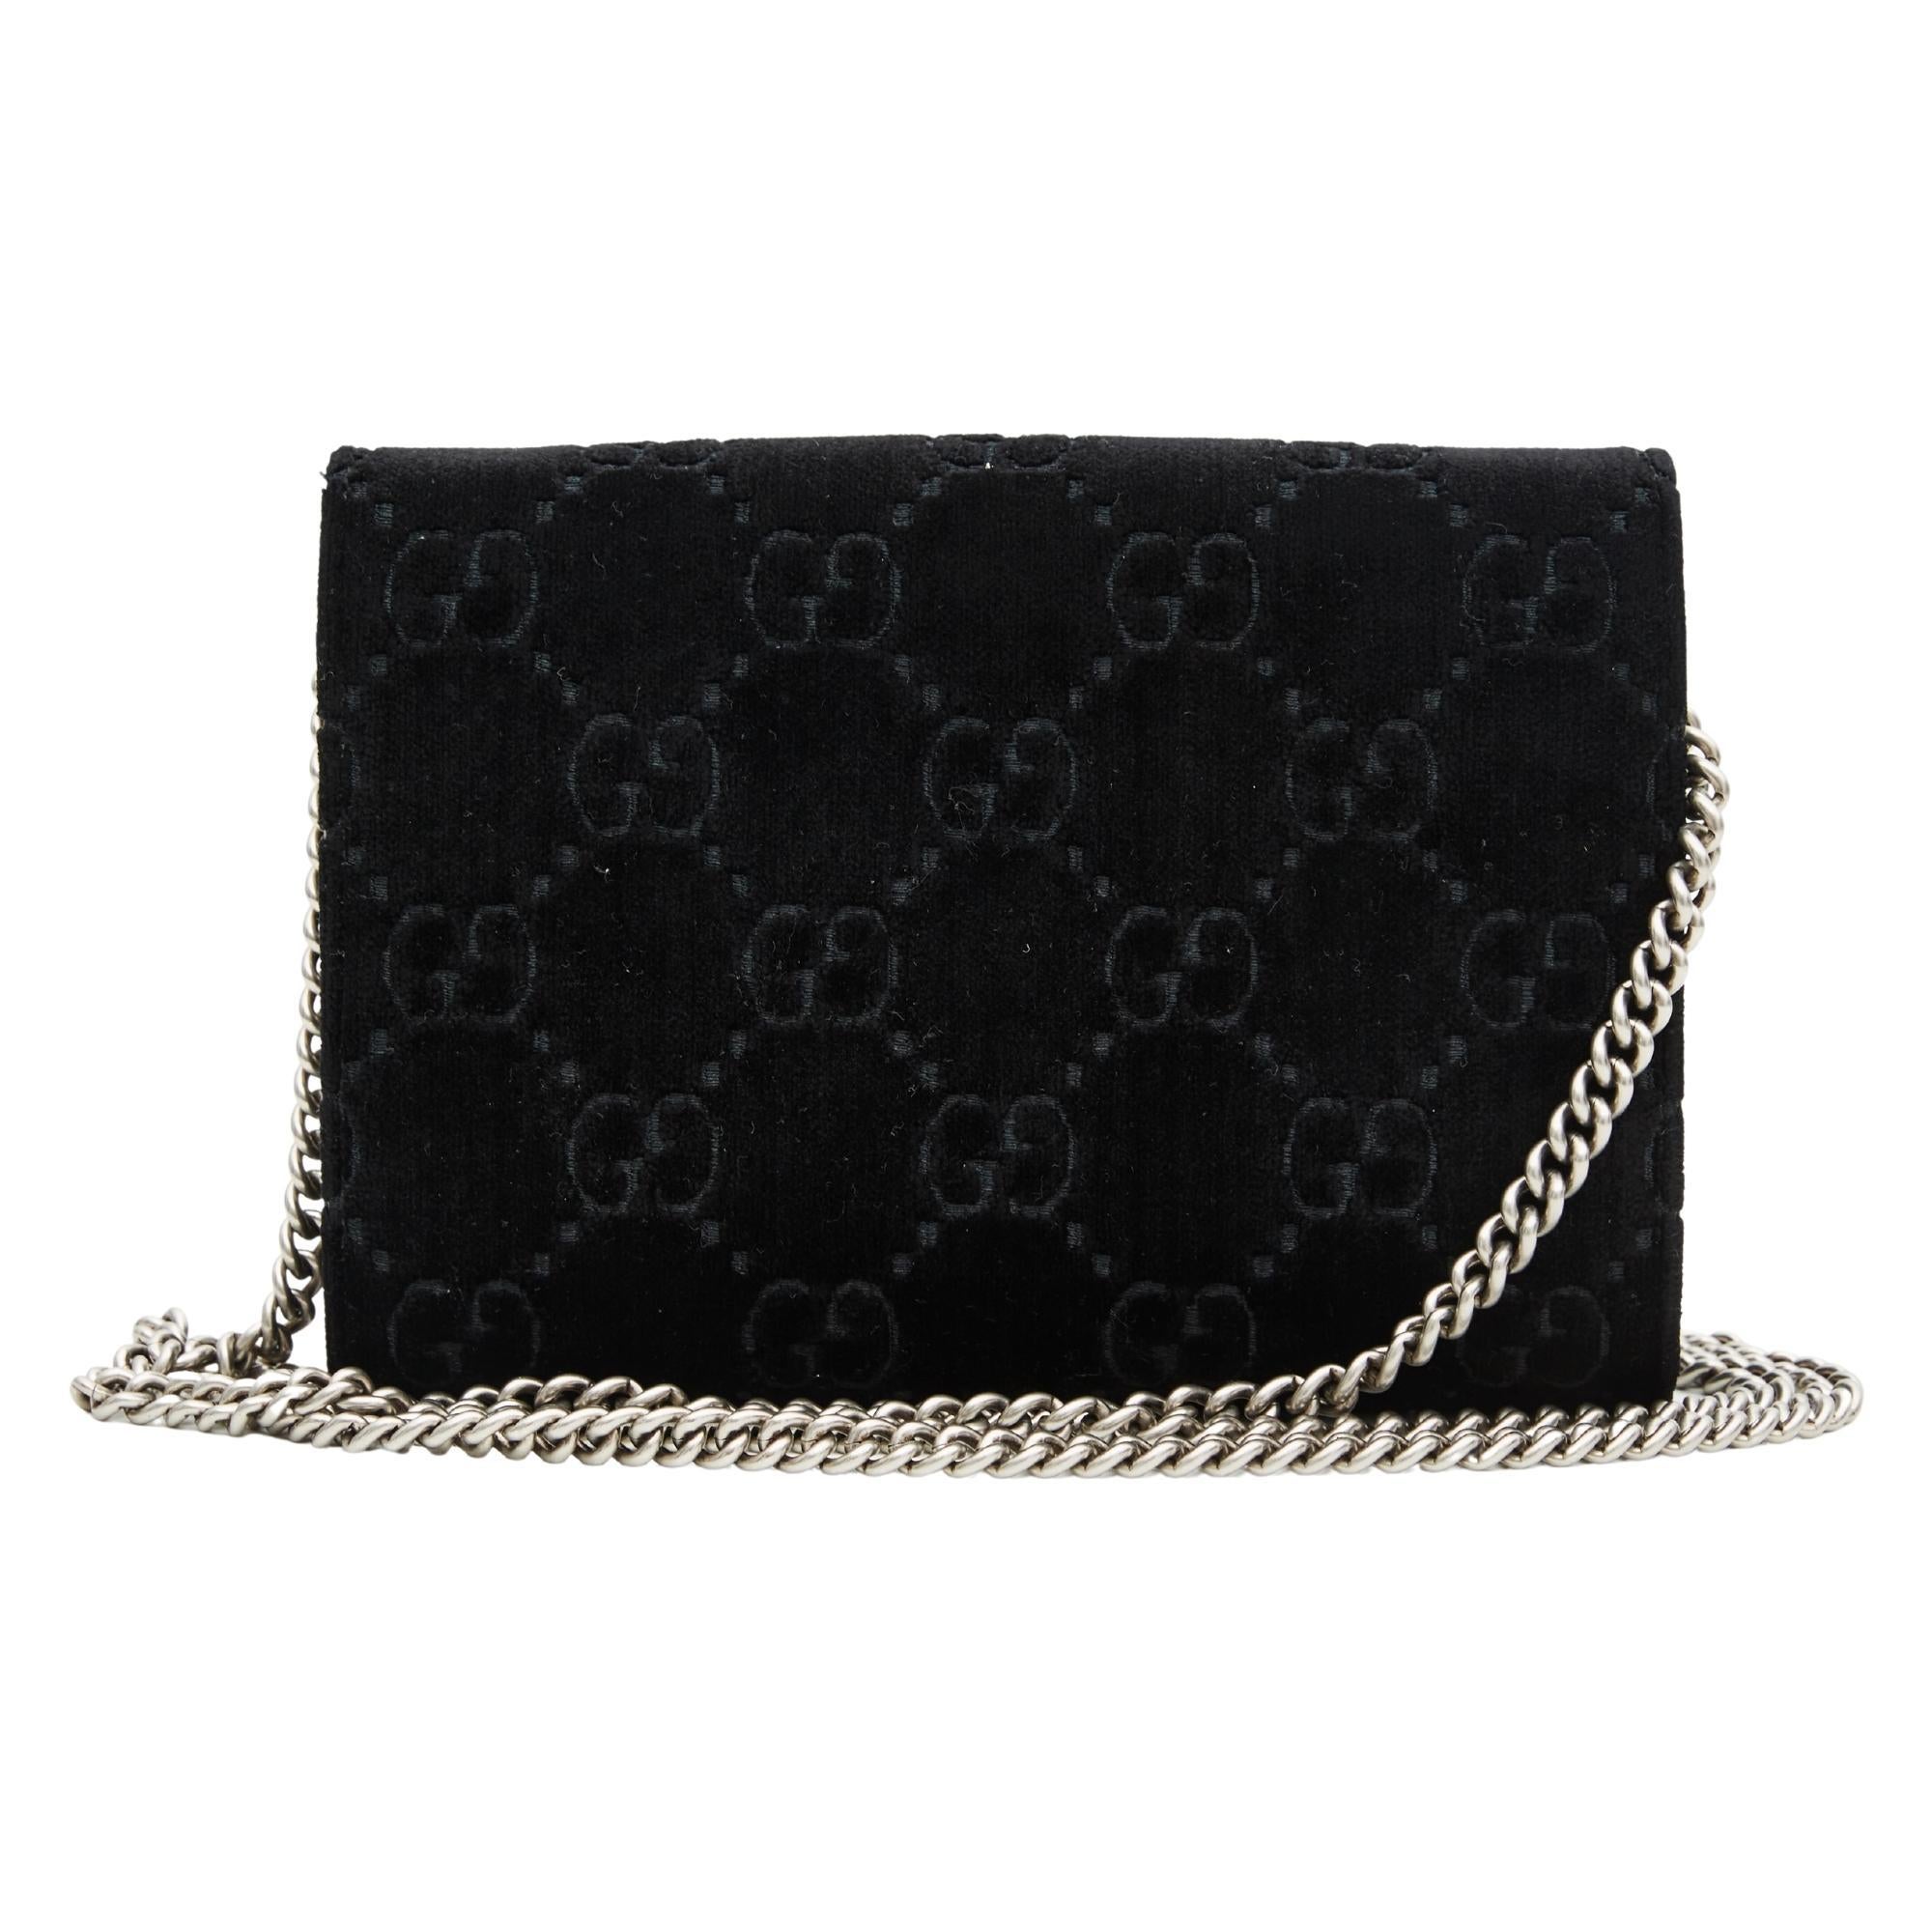 This bag is made of Gucci monogram in black velvet. This bag features an optional silver chain shoulder strap and a textured horseshoe closure with lion heads and crystals. This opens to a black fabric and leather interior with cards slots, patch